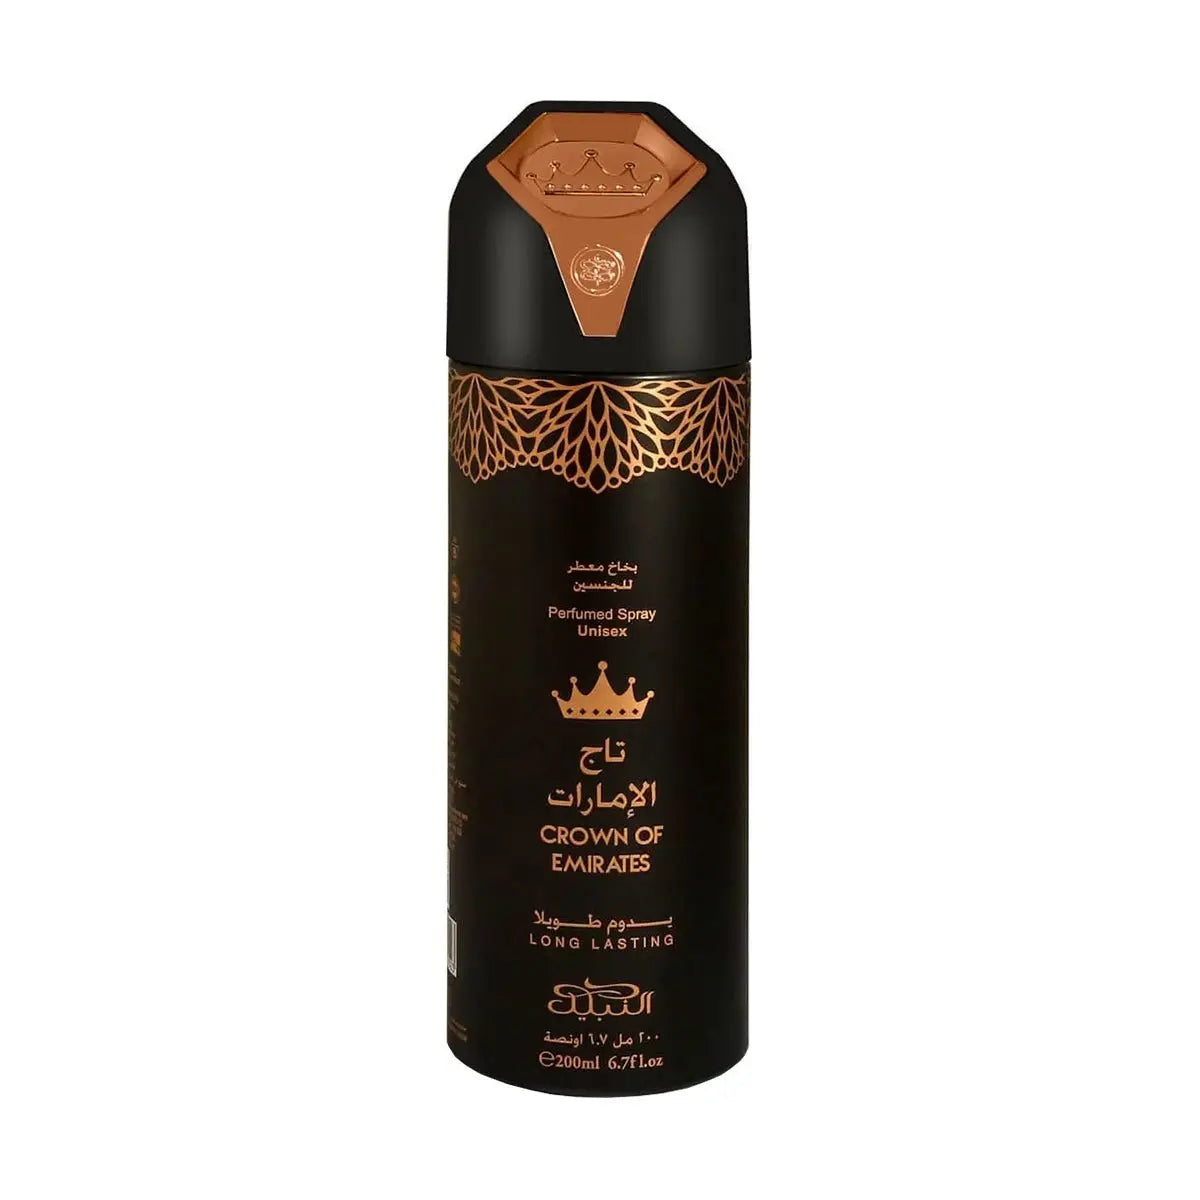 The image shows a cylindrical spray bottle of deodorant from Nabeel Perfumes. The product is named "Crown of Emirates." The bottle has a black and gold color scheme, featuring intricate gold designs around the top and a crown logo beneath the brand name. The text on the bottle reads: "Perfumed Spray Unisex, Crown of Emirates, Long Lasting." The bottle size is indicated as 200ml (6.7 fl. oz).